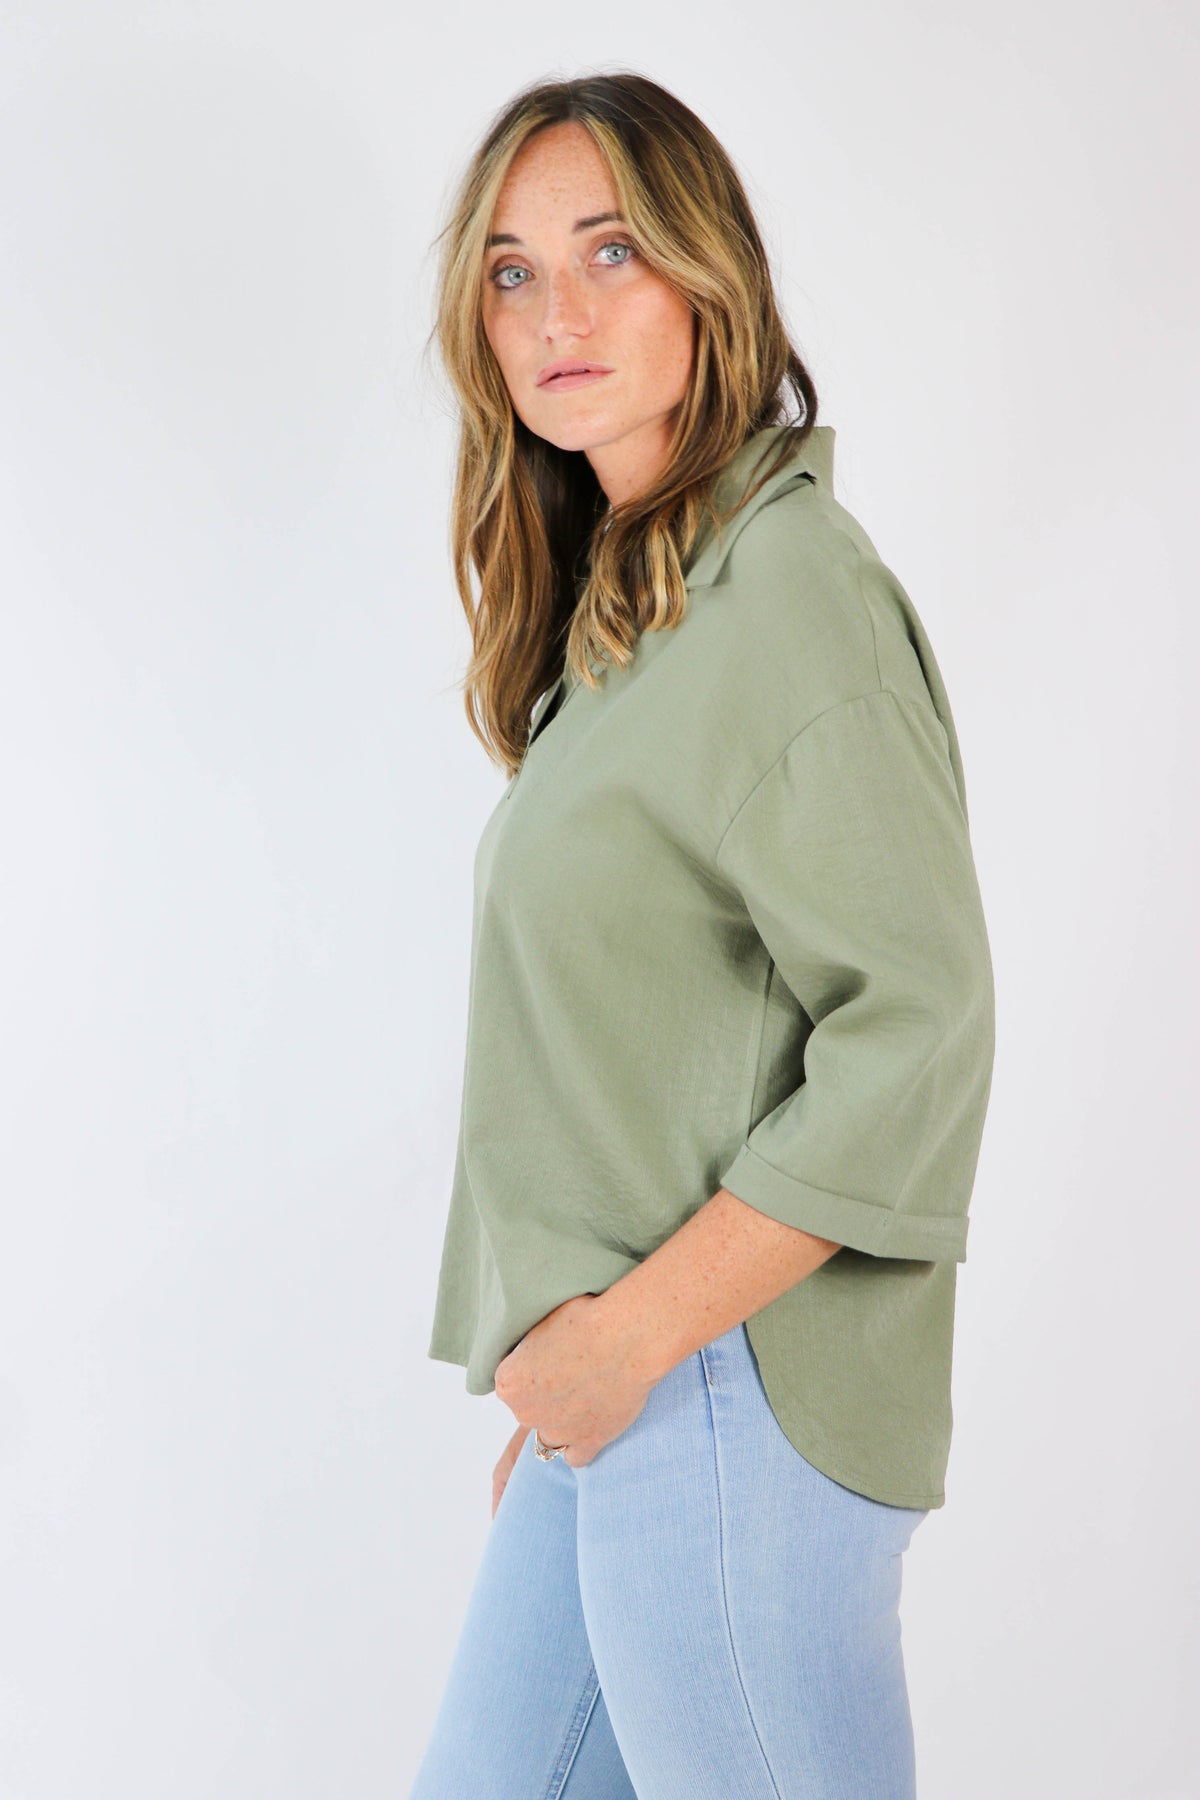 She + Sky | 3/4 Sleeve Olive Top for Women | Sweetest Stitch Boutique